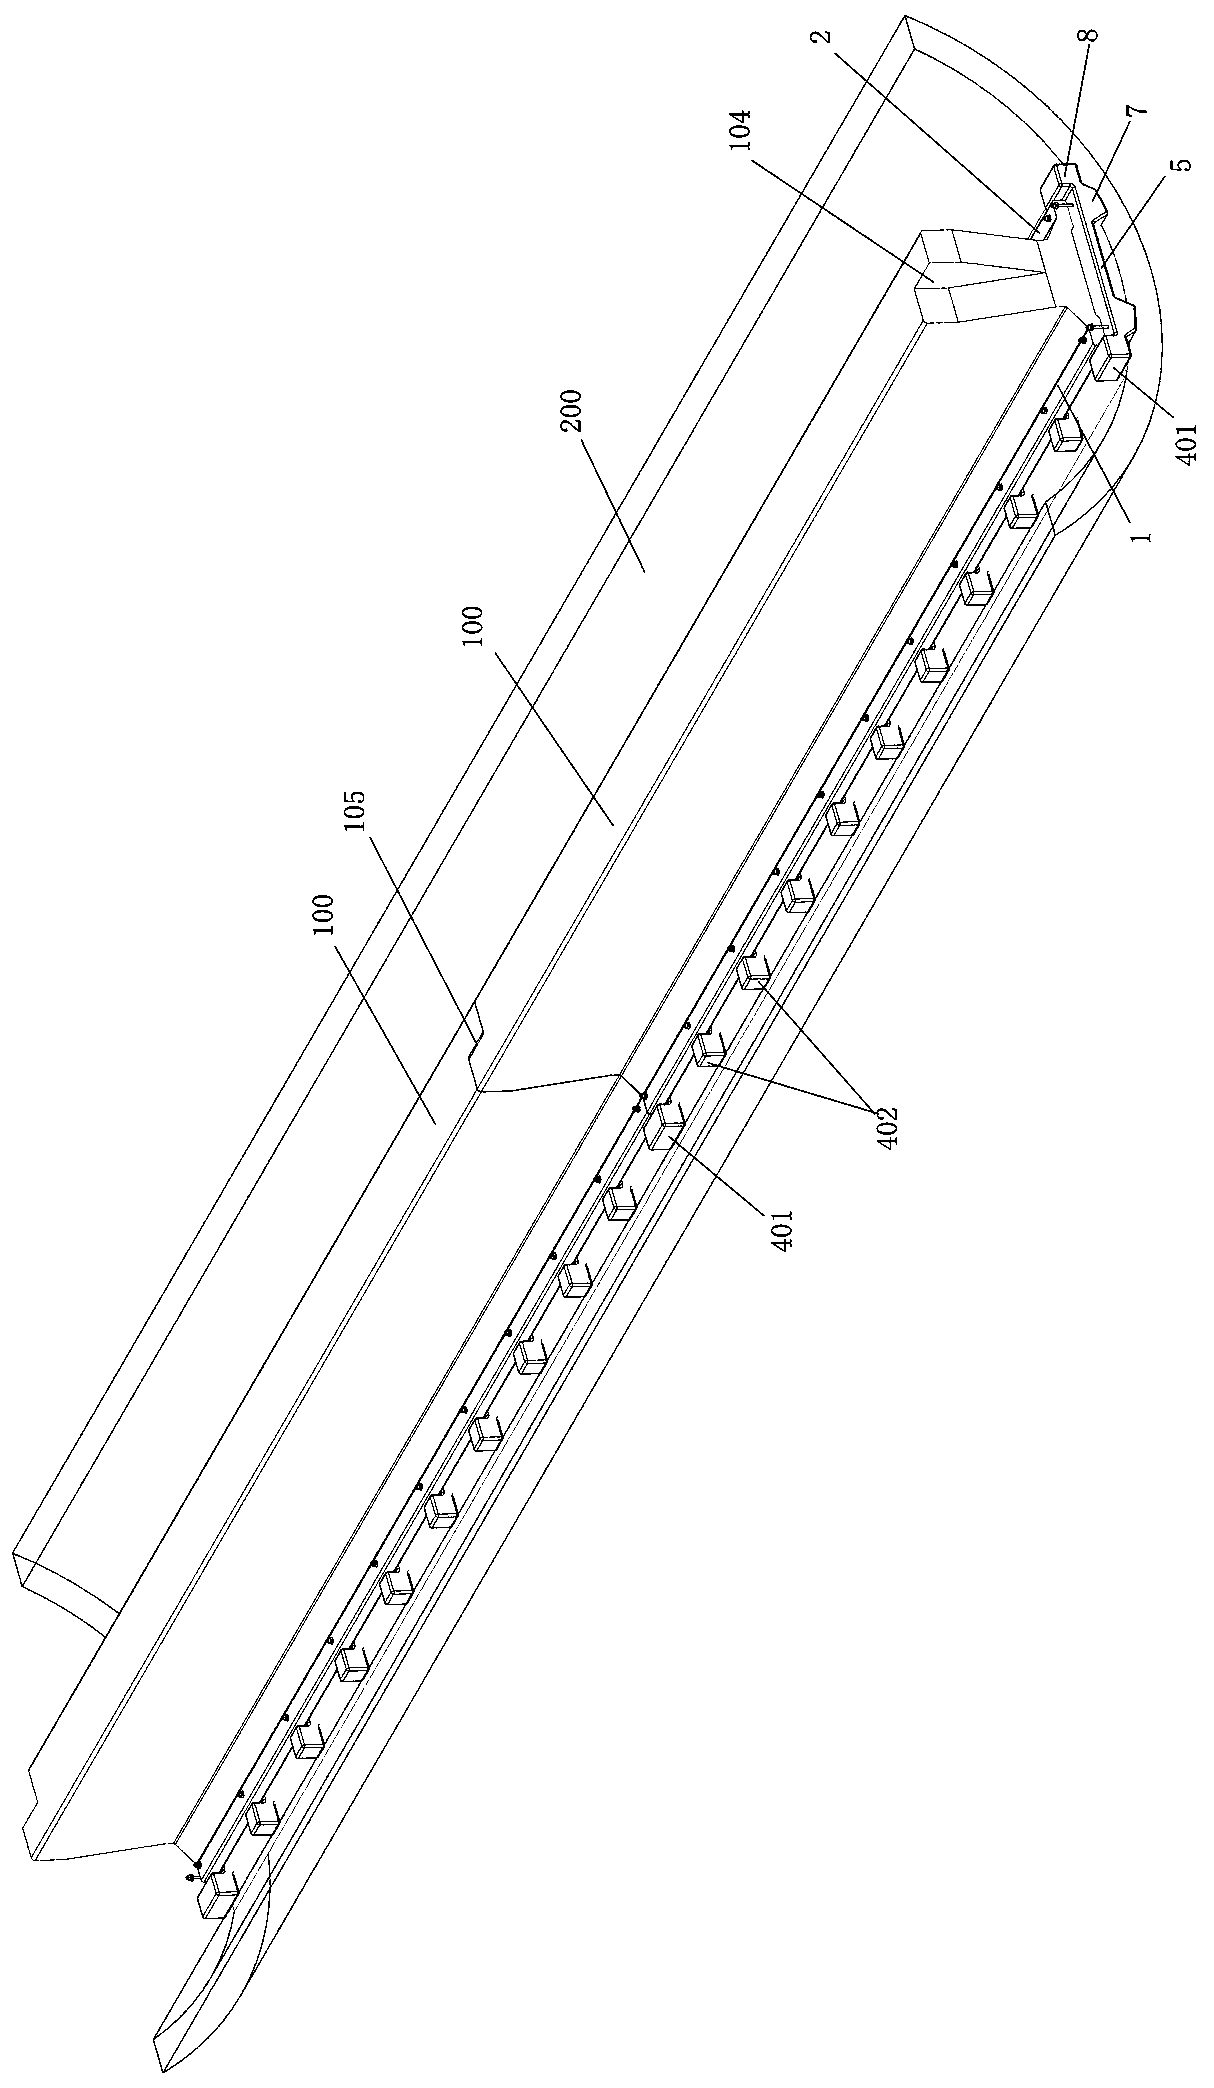 A toe-shaped track beam and a straddle-type monorail transit system